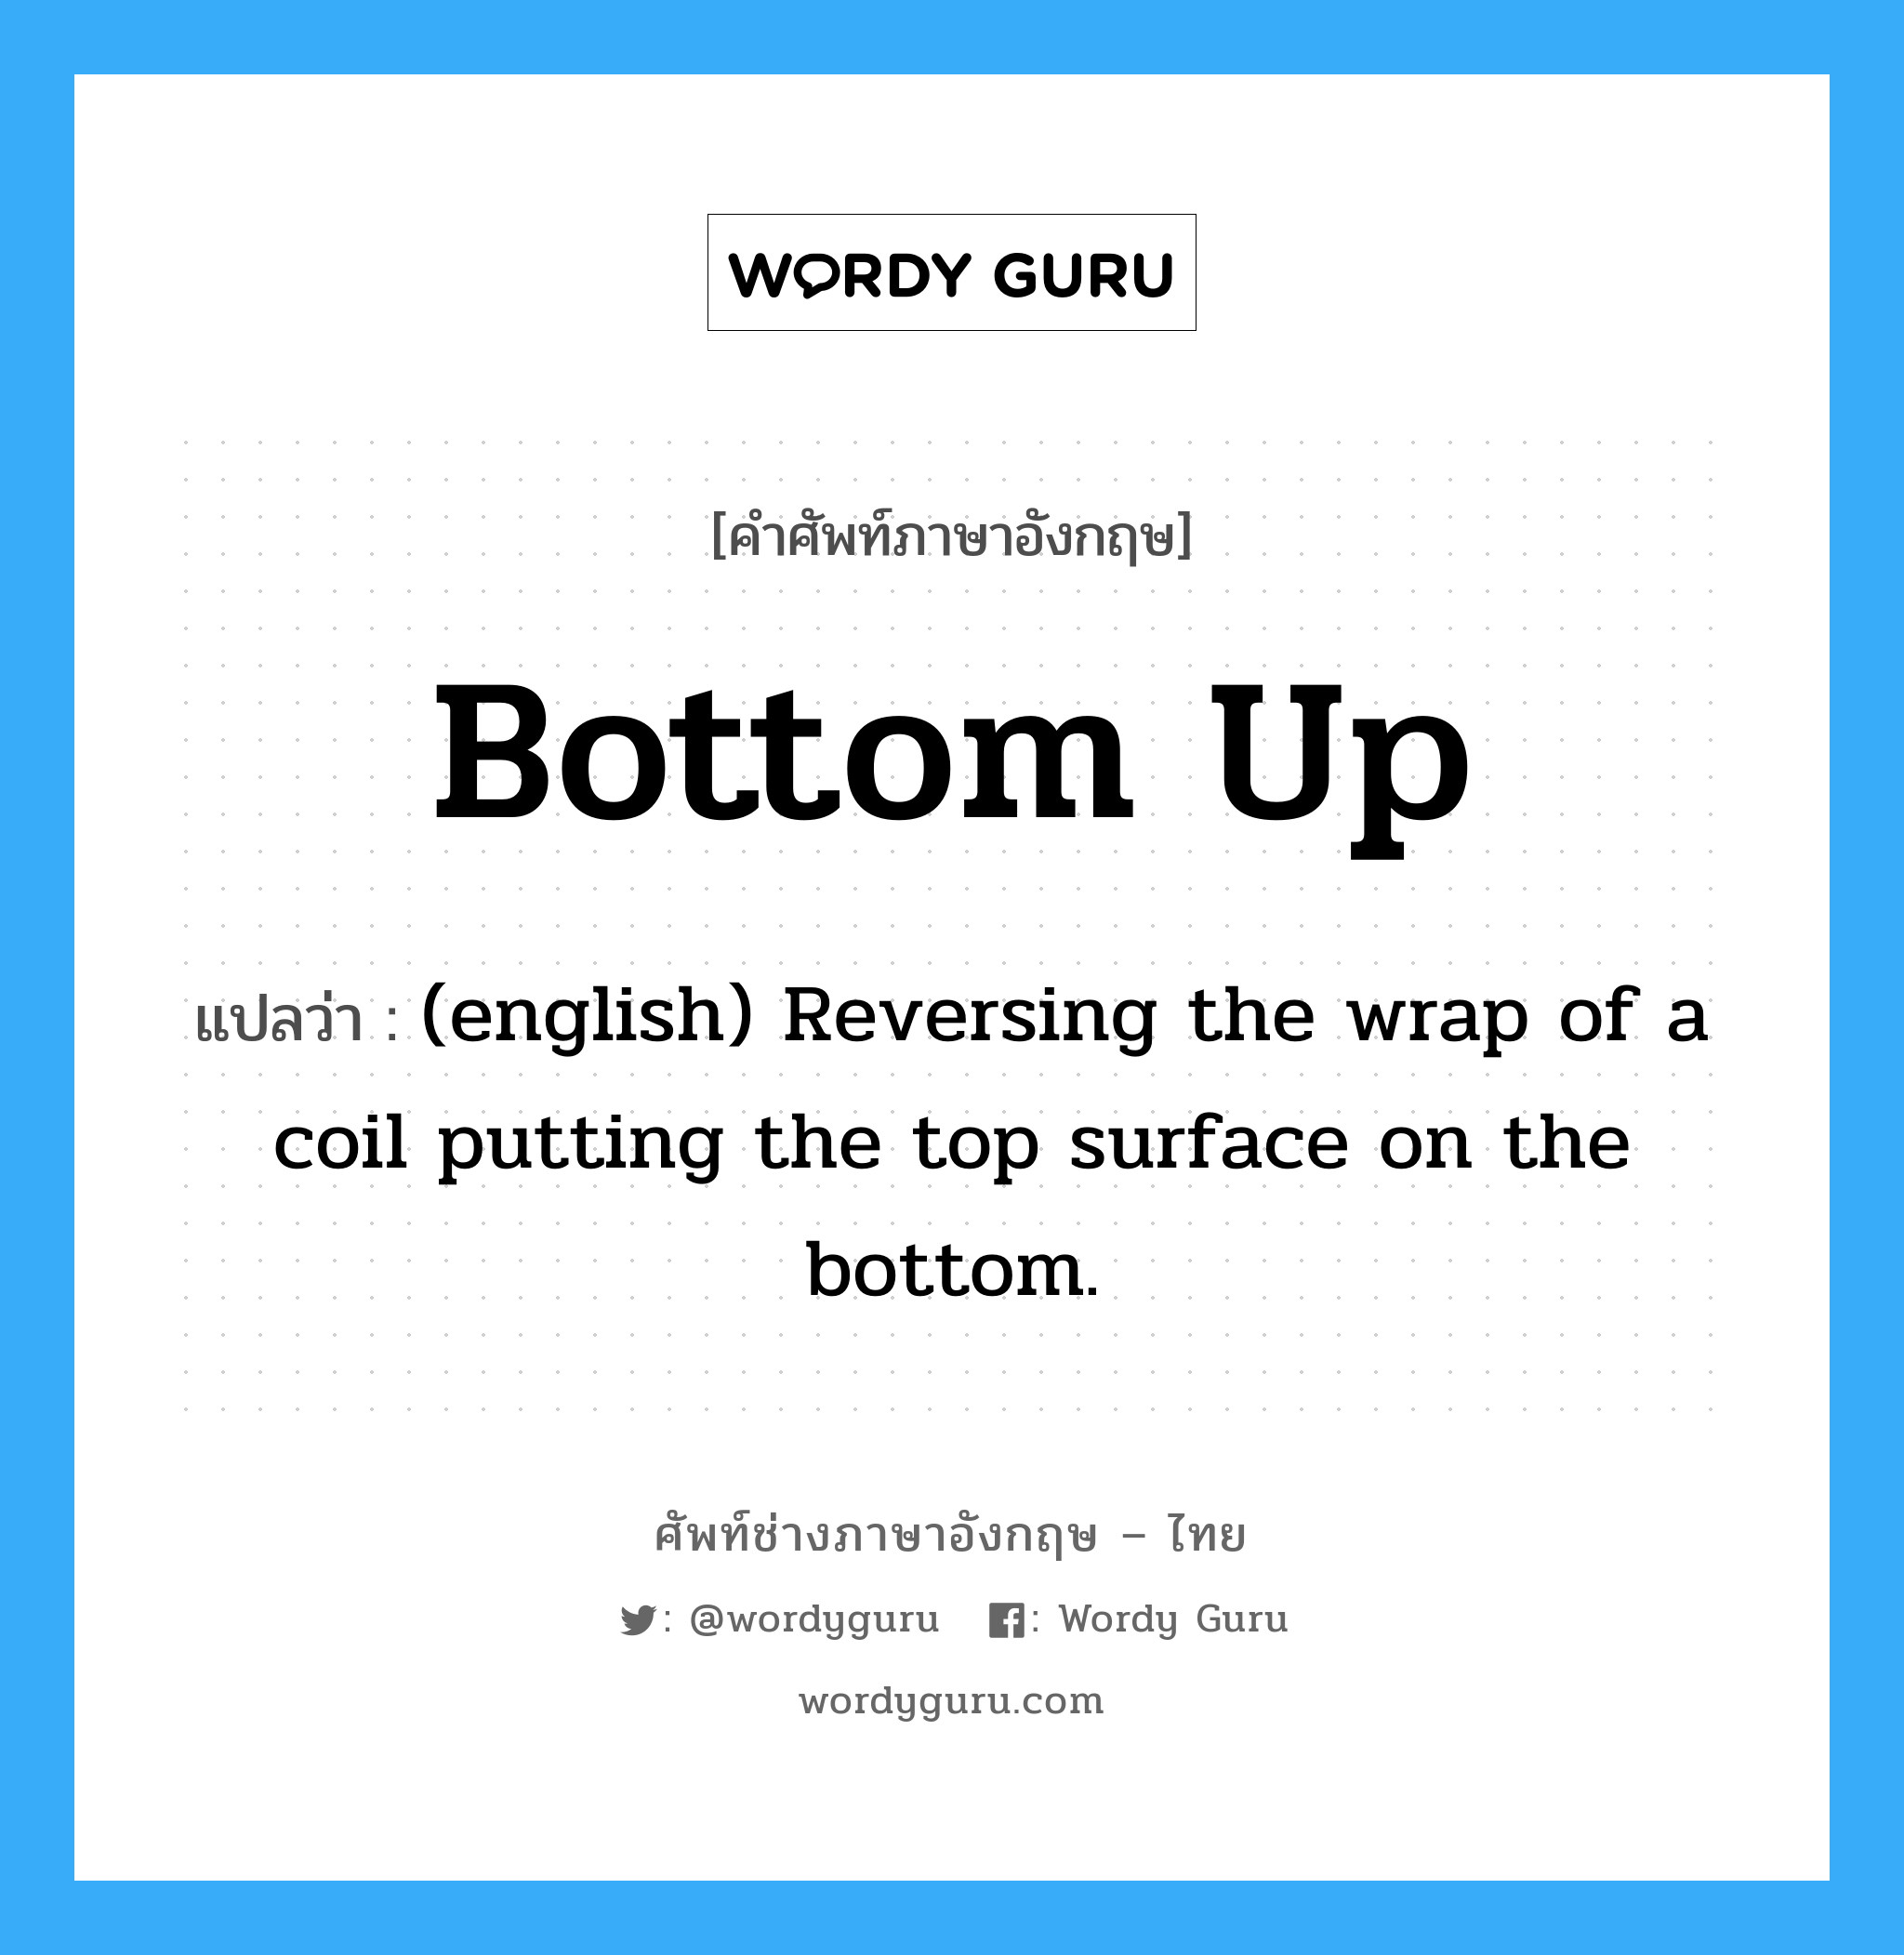 (english) Reversing the wrap of a coil putting the top surface on the bottom. ภาษาอังกฤษ?, คำศัพท์ช่างภาษาอังกฤษ - ไทย (english) Reversing the wrap of a coil putting the top surface on the bottom. คำศัพท์ภาษาอังกฤษ (english) Reversing the wrap of a coil putting the top surface on the bottom. แปลว่า Bottom Up